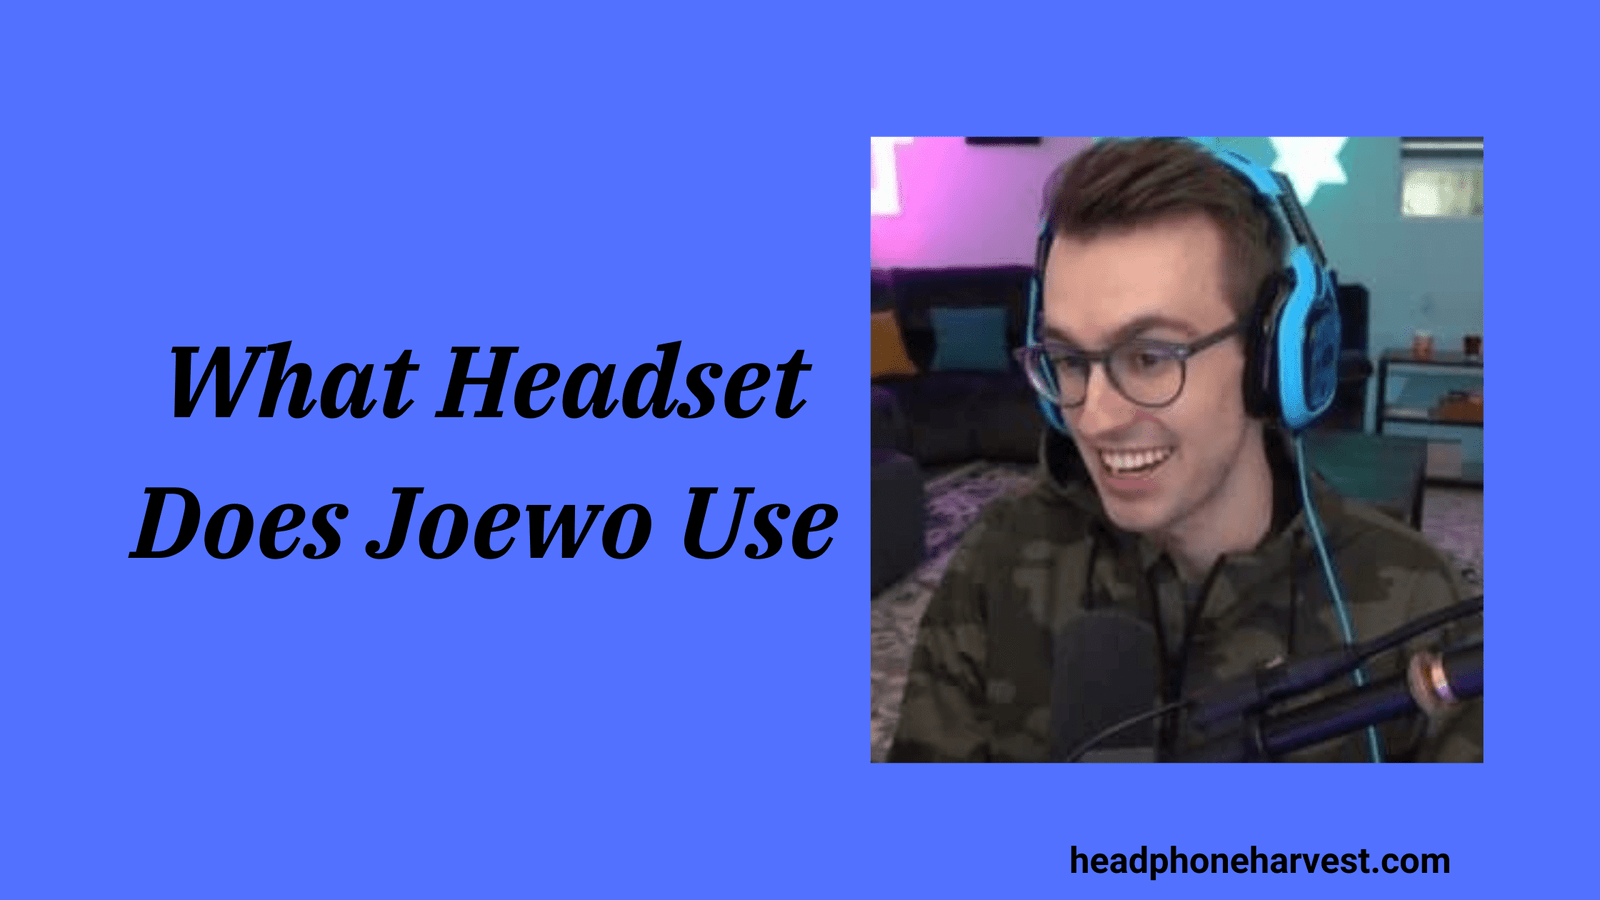 What Headset Does Joewo Use